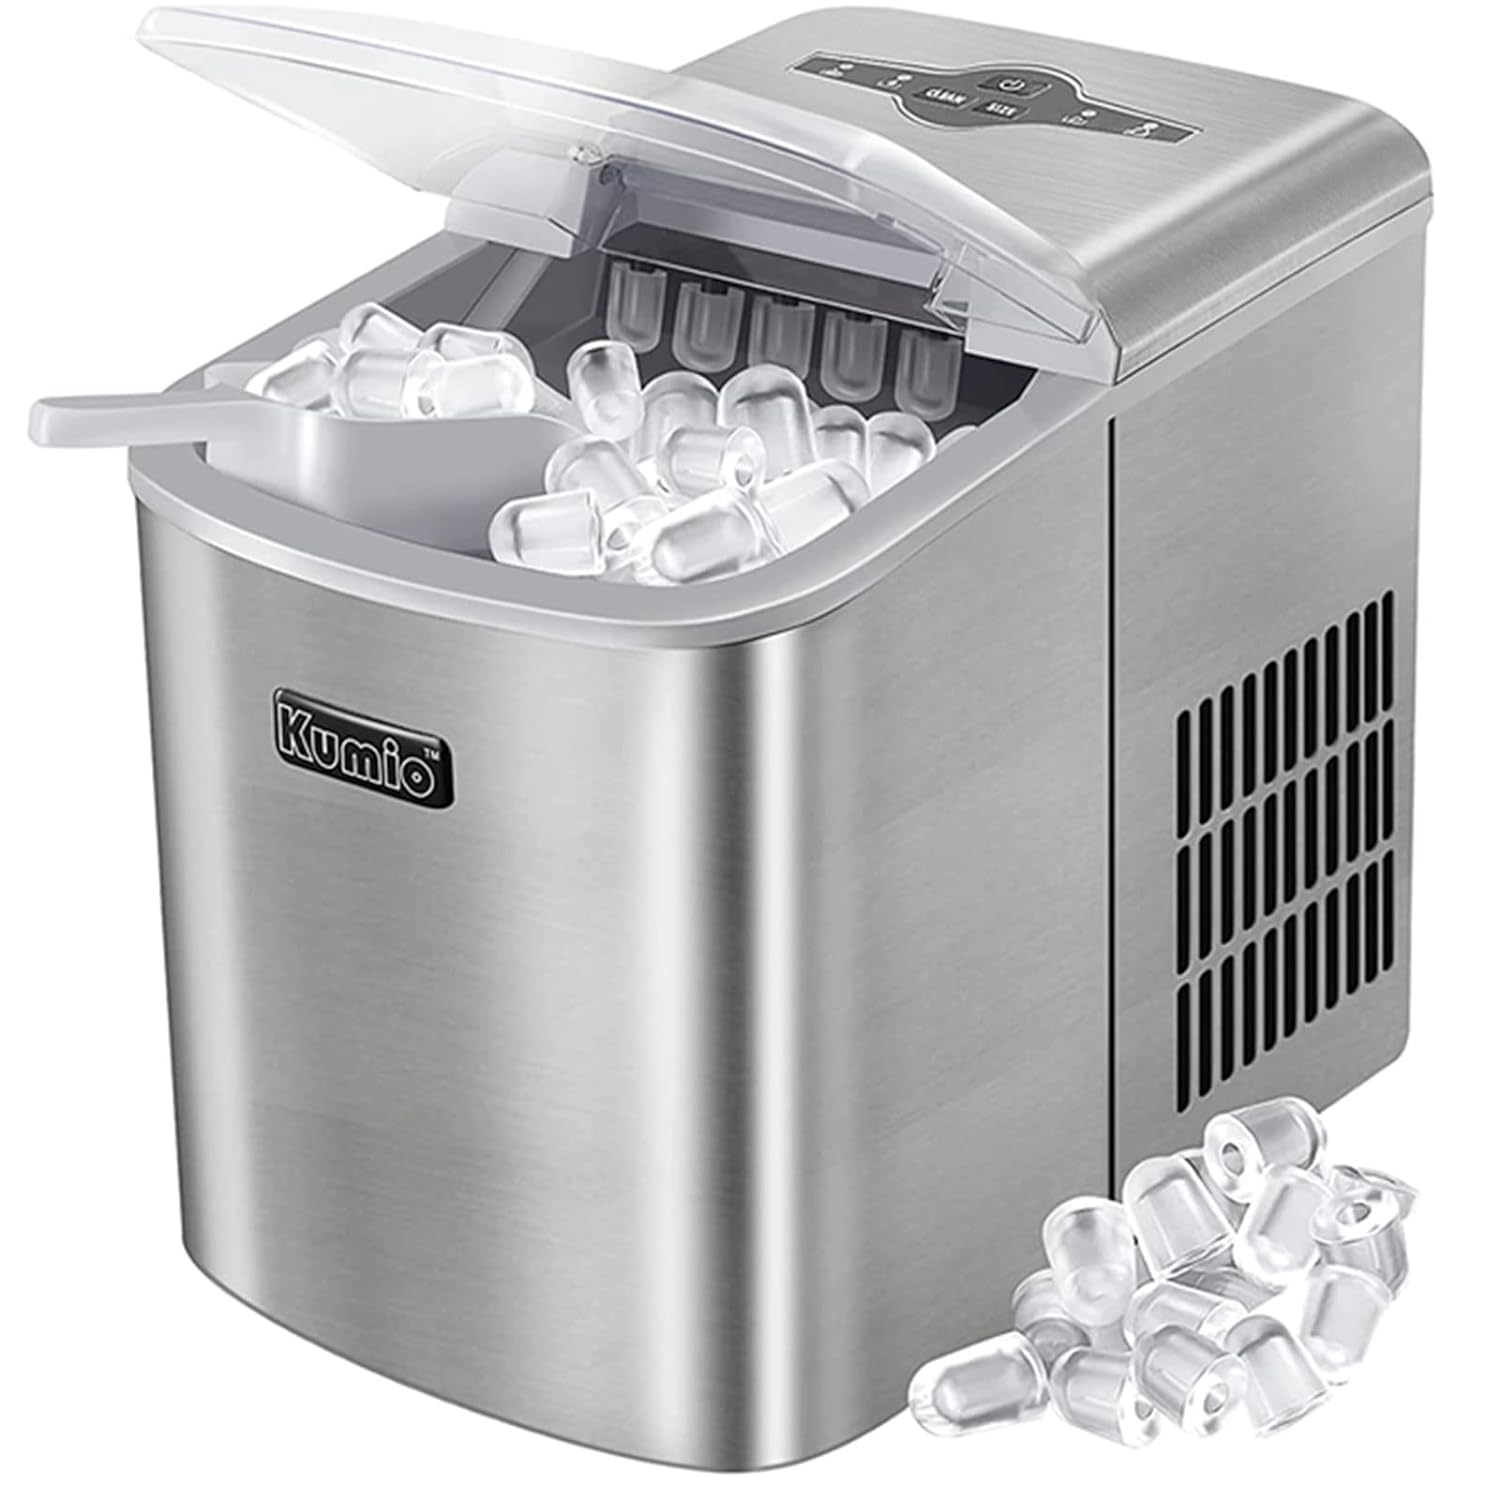 KUMIO Stainless Steel Ice Makers Countertop, 33 Lbs in 24 Hrs, 10 Bullet Ice Ready in 6-8 Mins, Automatic Self-Cleaning, 2 Sizes of Bullet Ice for Home Kitchen Office Bar Party